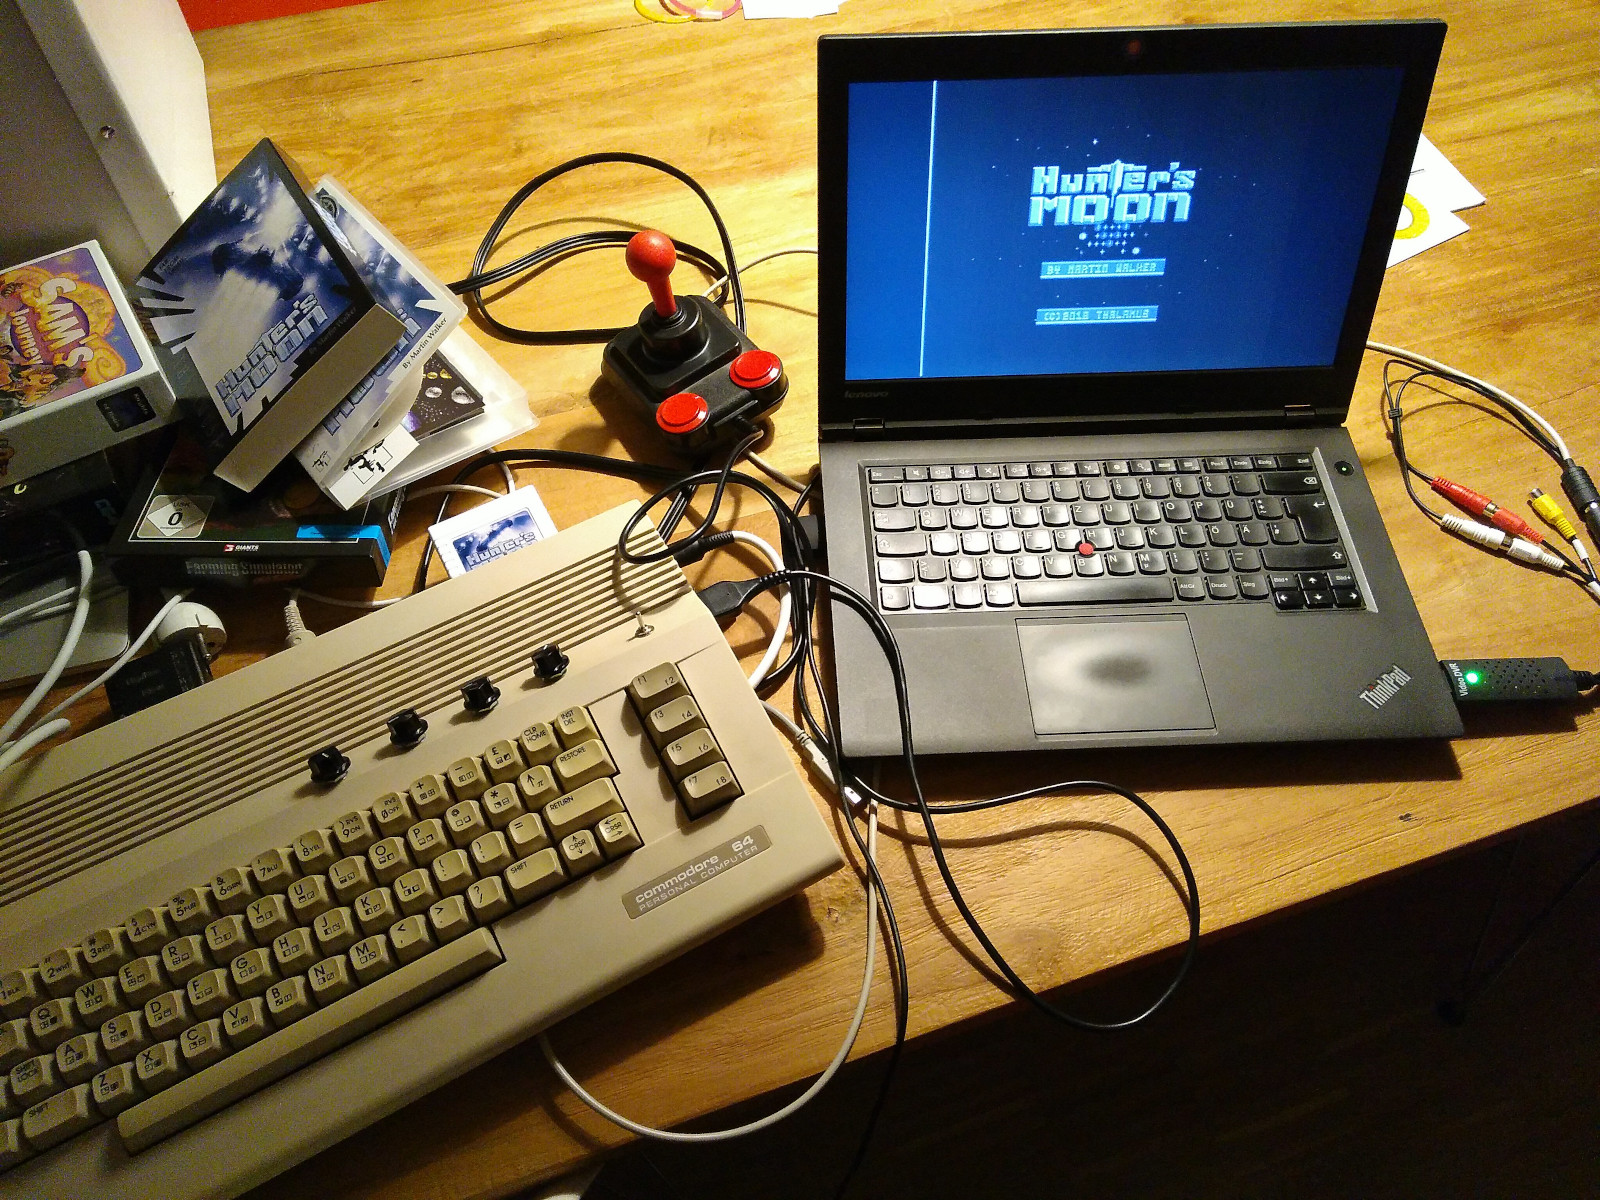 Commodore 64 connected to Linux system via video grabber